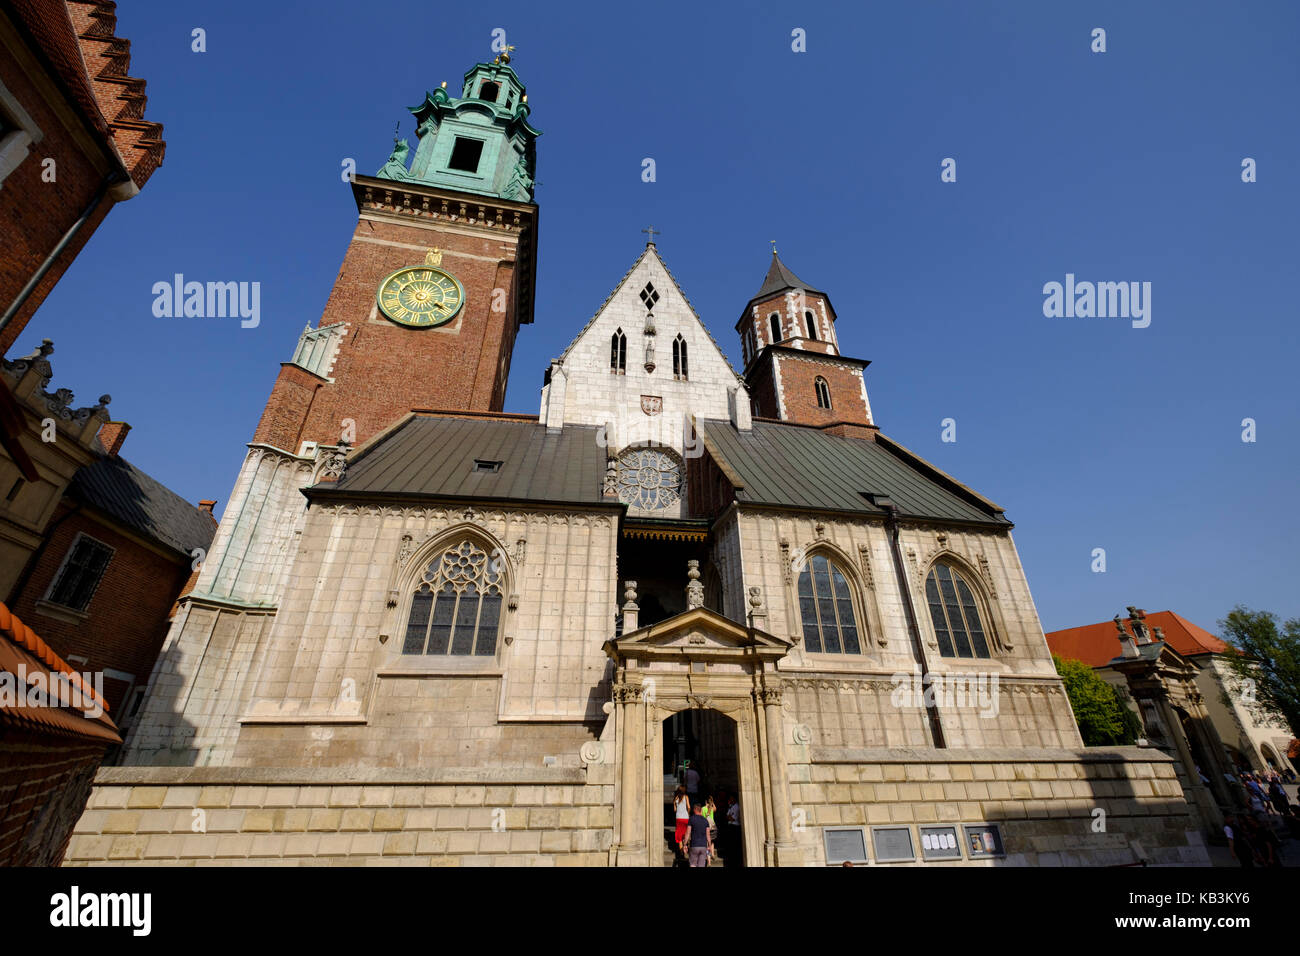 Wawelska High Resolution Stock Photography and Images - Alamy